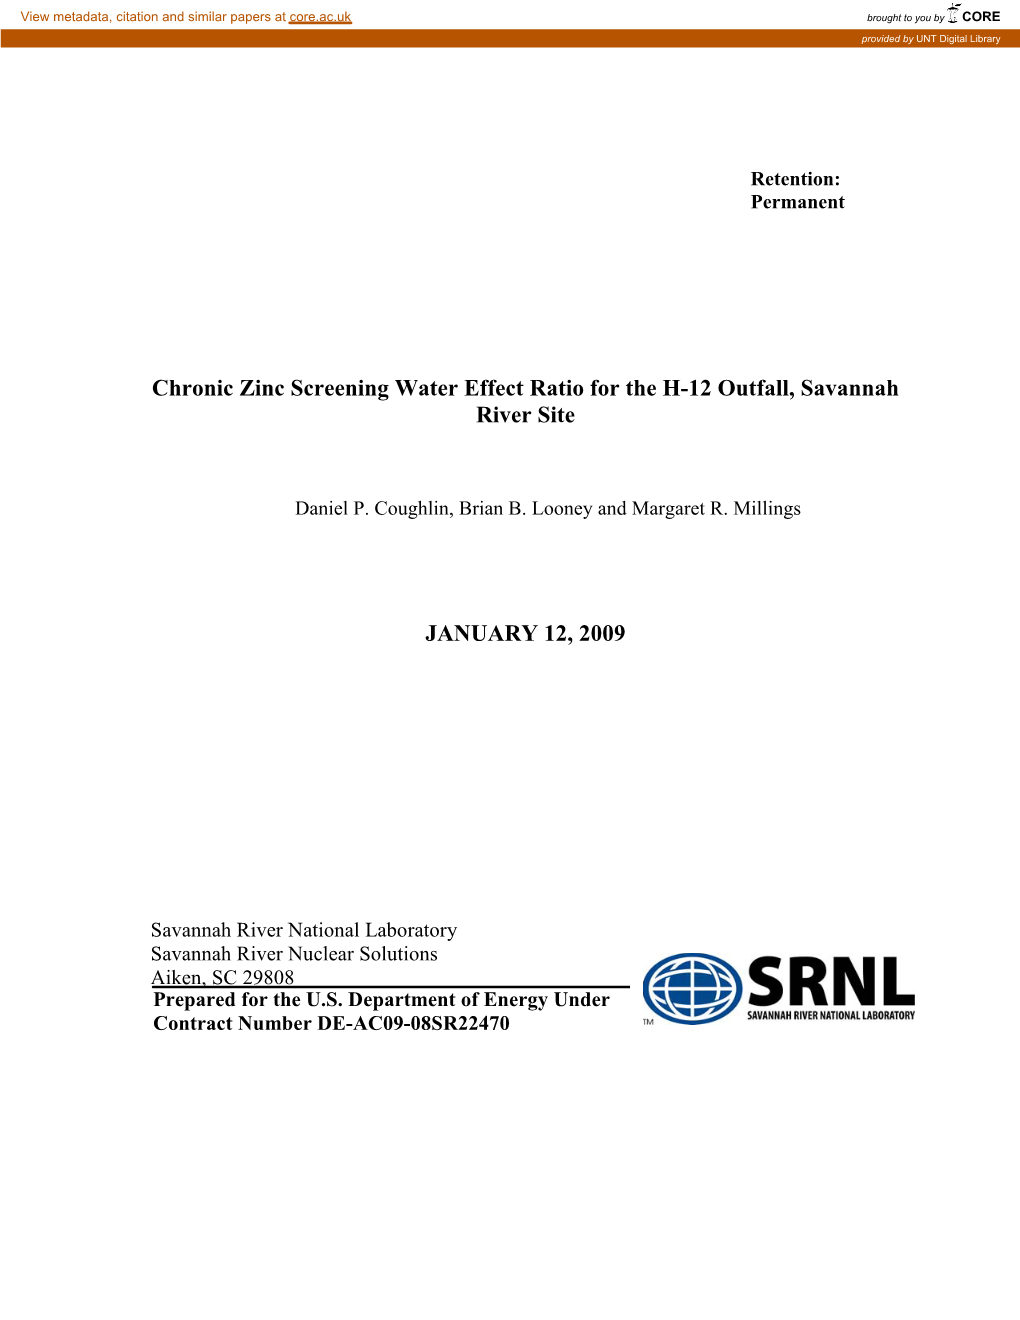 Chronic Zinc Screening Water Effect Ratio for the H-12 Outfall, Savannah River Site